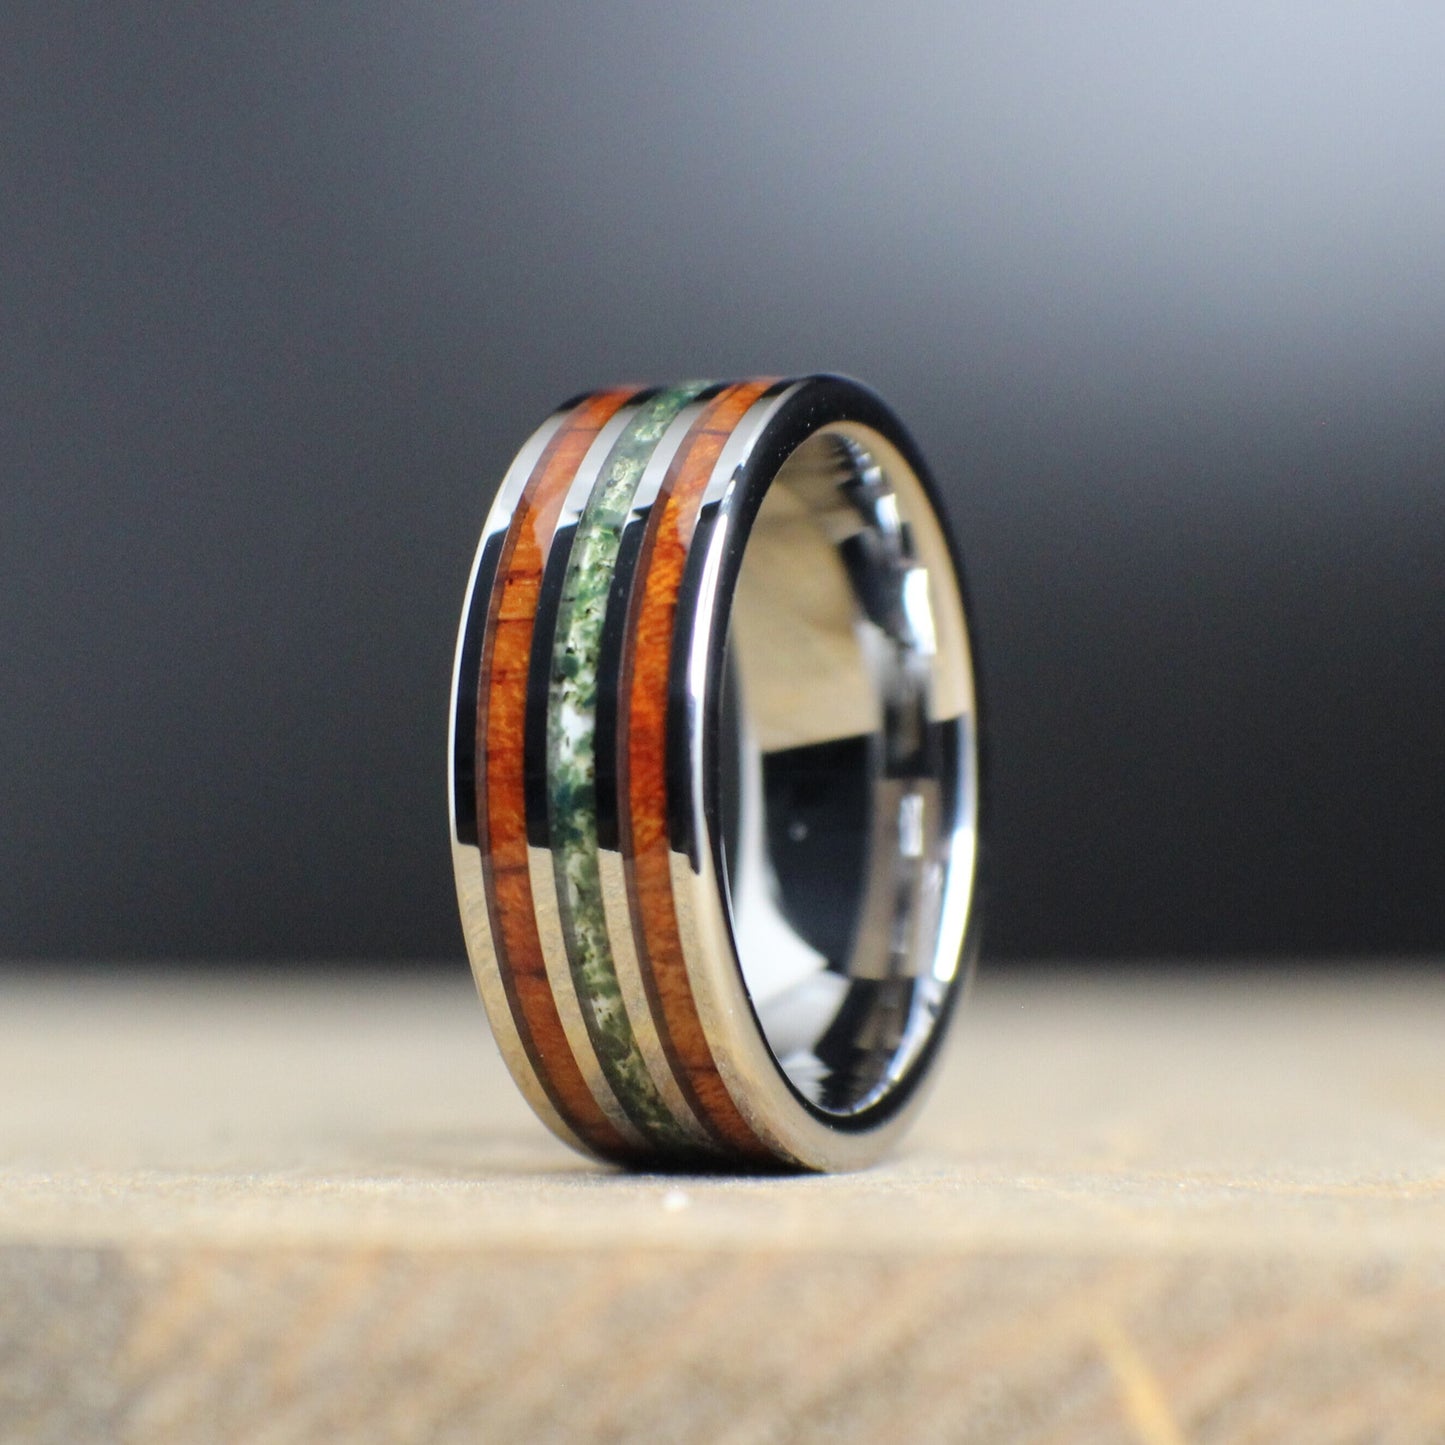 Moss agate wedding band with rosewood.